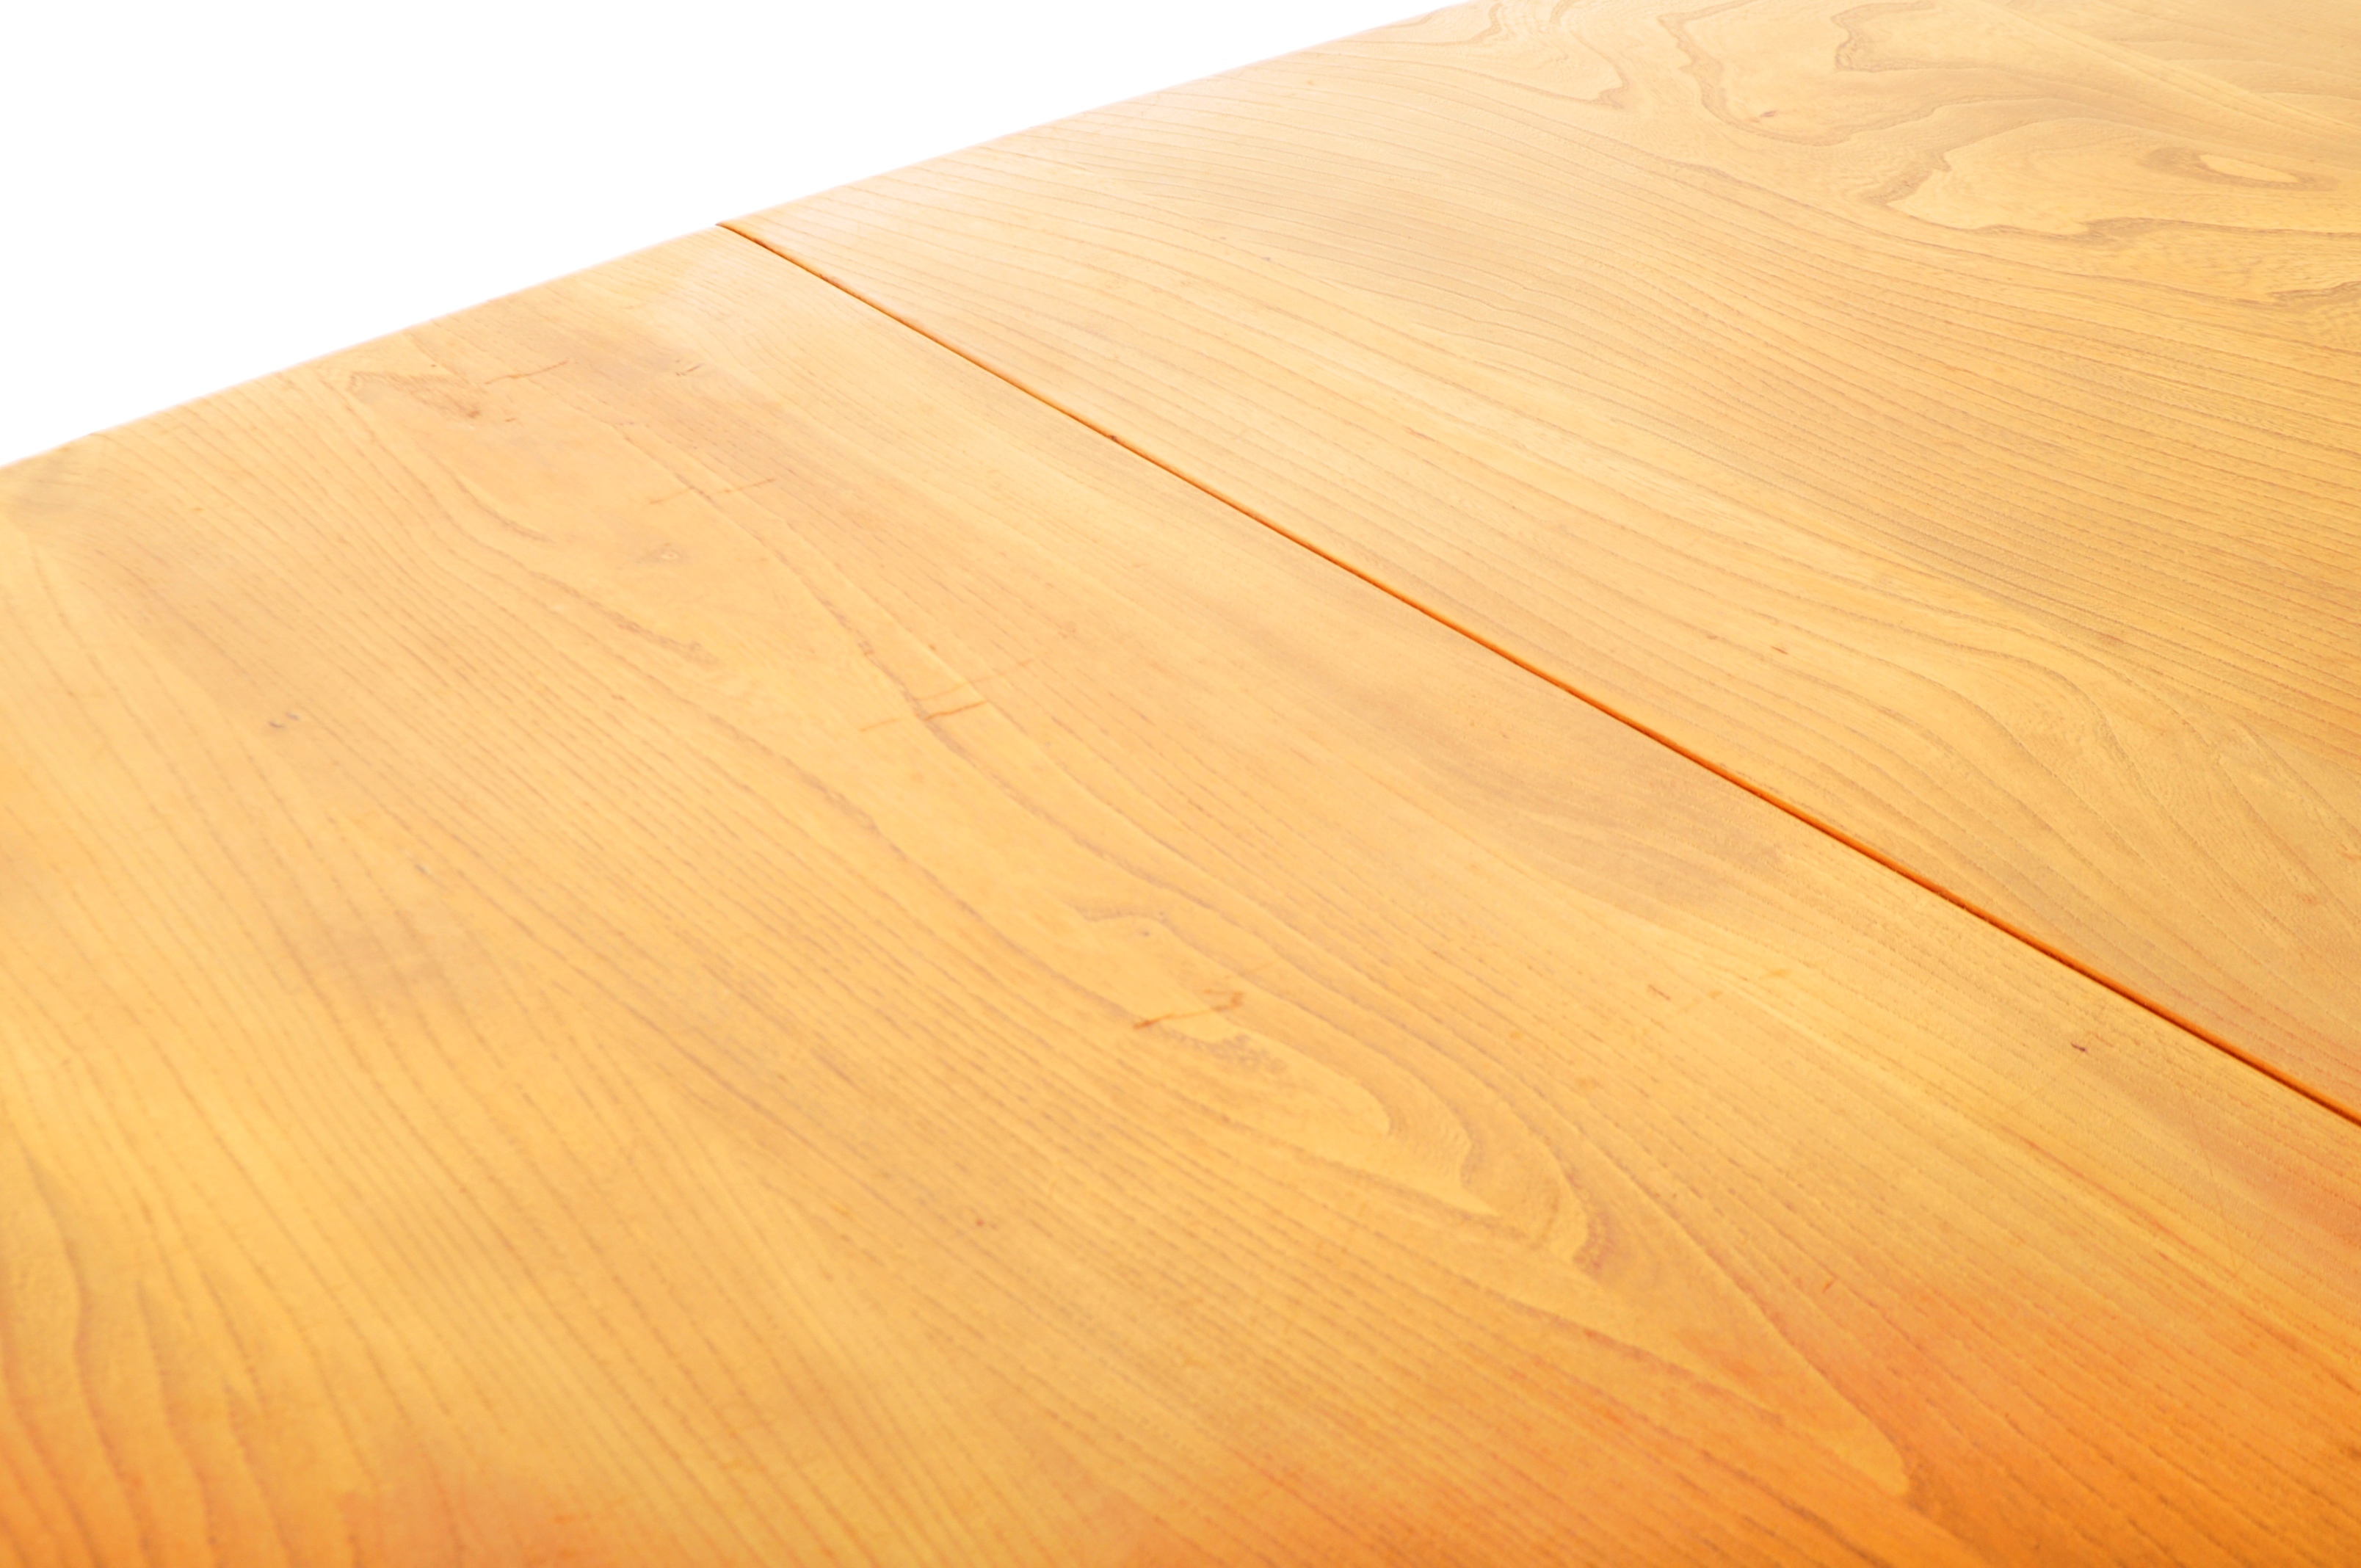 ERCOL GRAND PLANK EXTENDING BEECH AND ELM DINING TABLE - Image 4 of 6